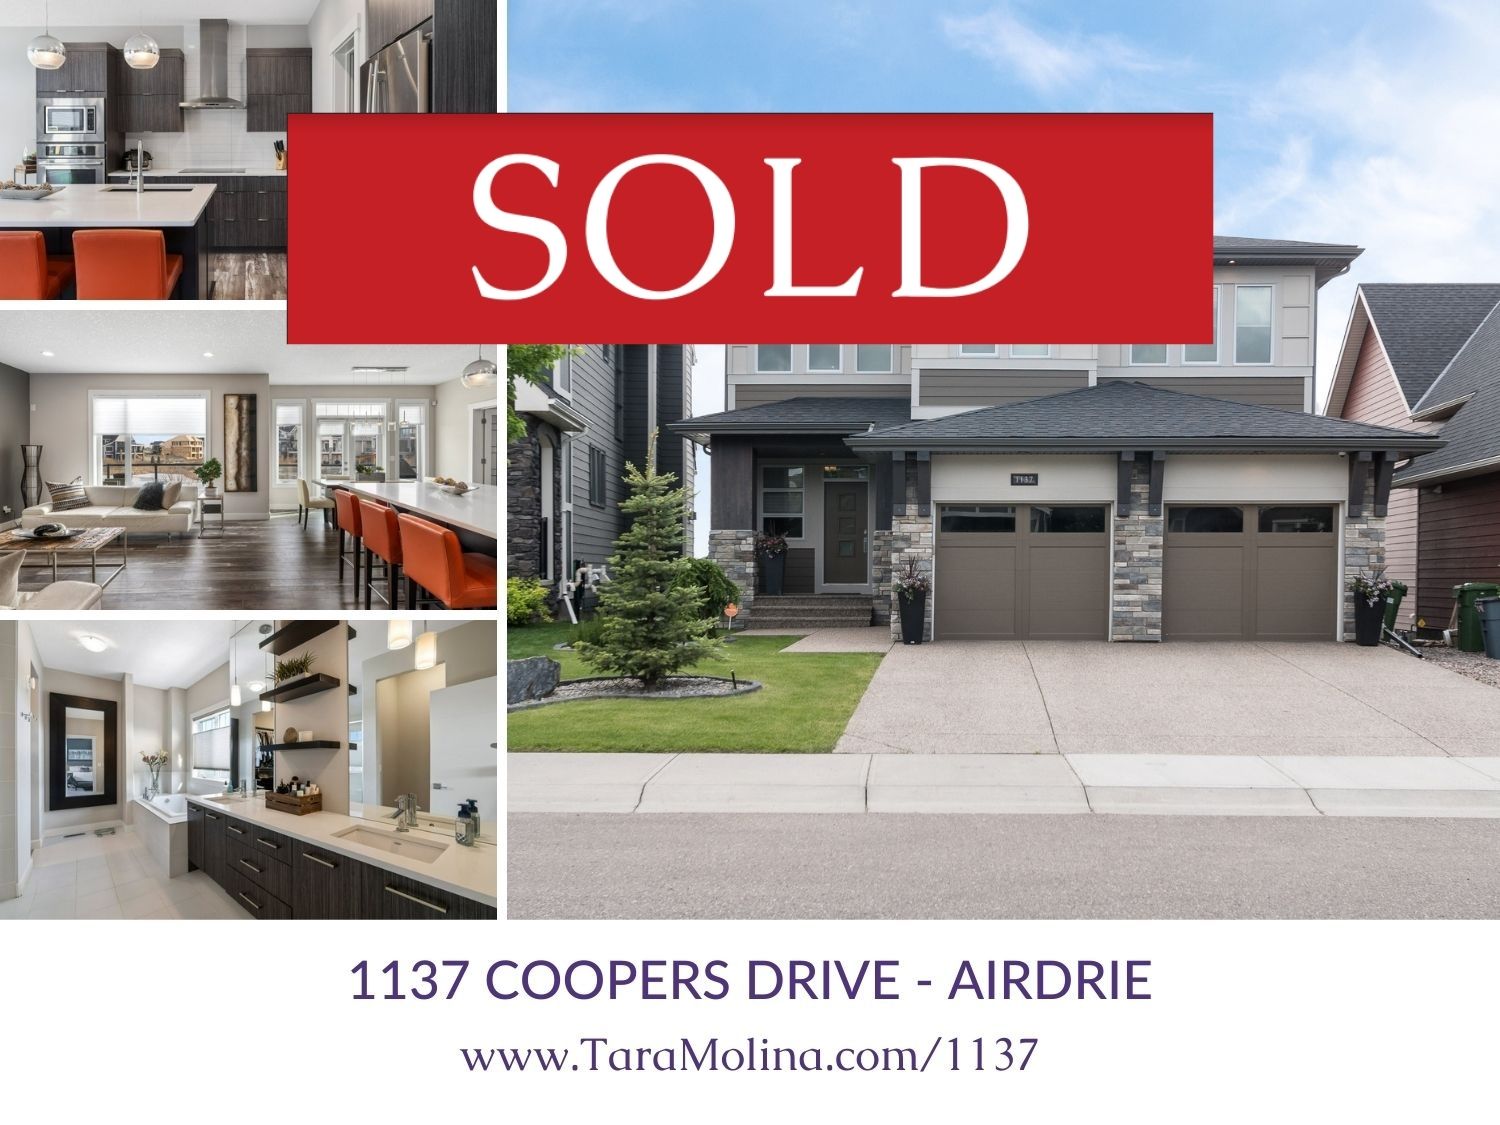 SOLD - 1137 Coopers Drive